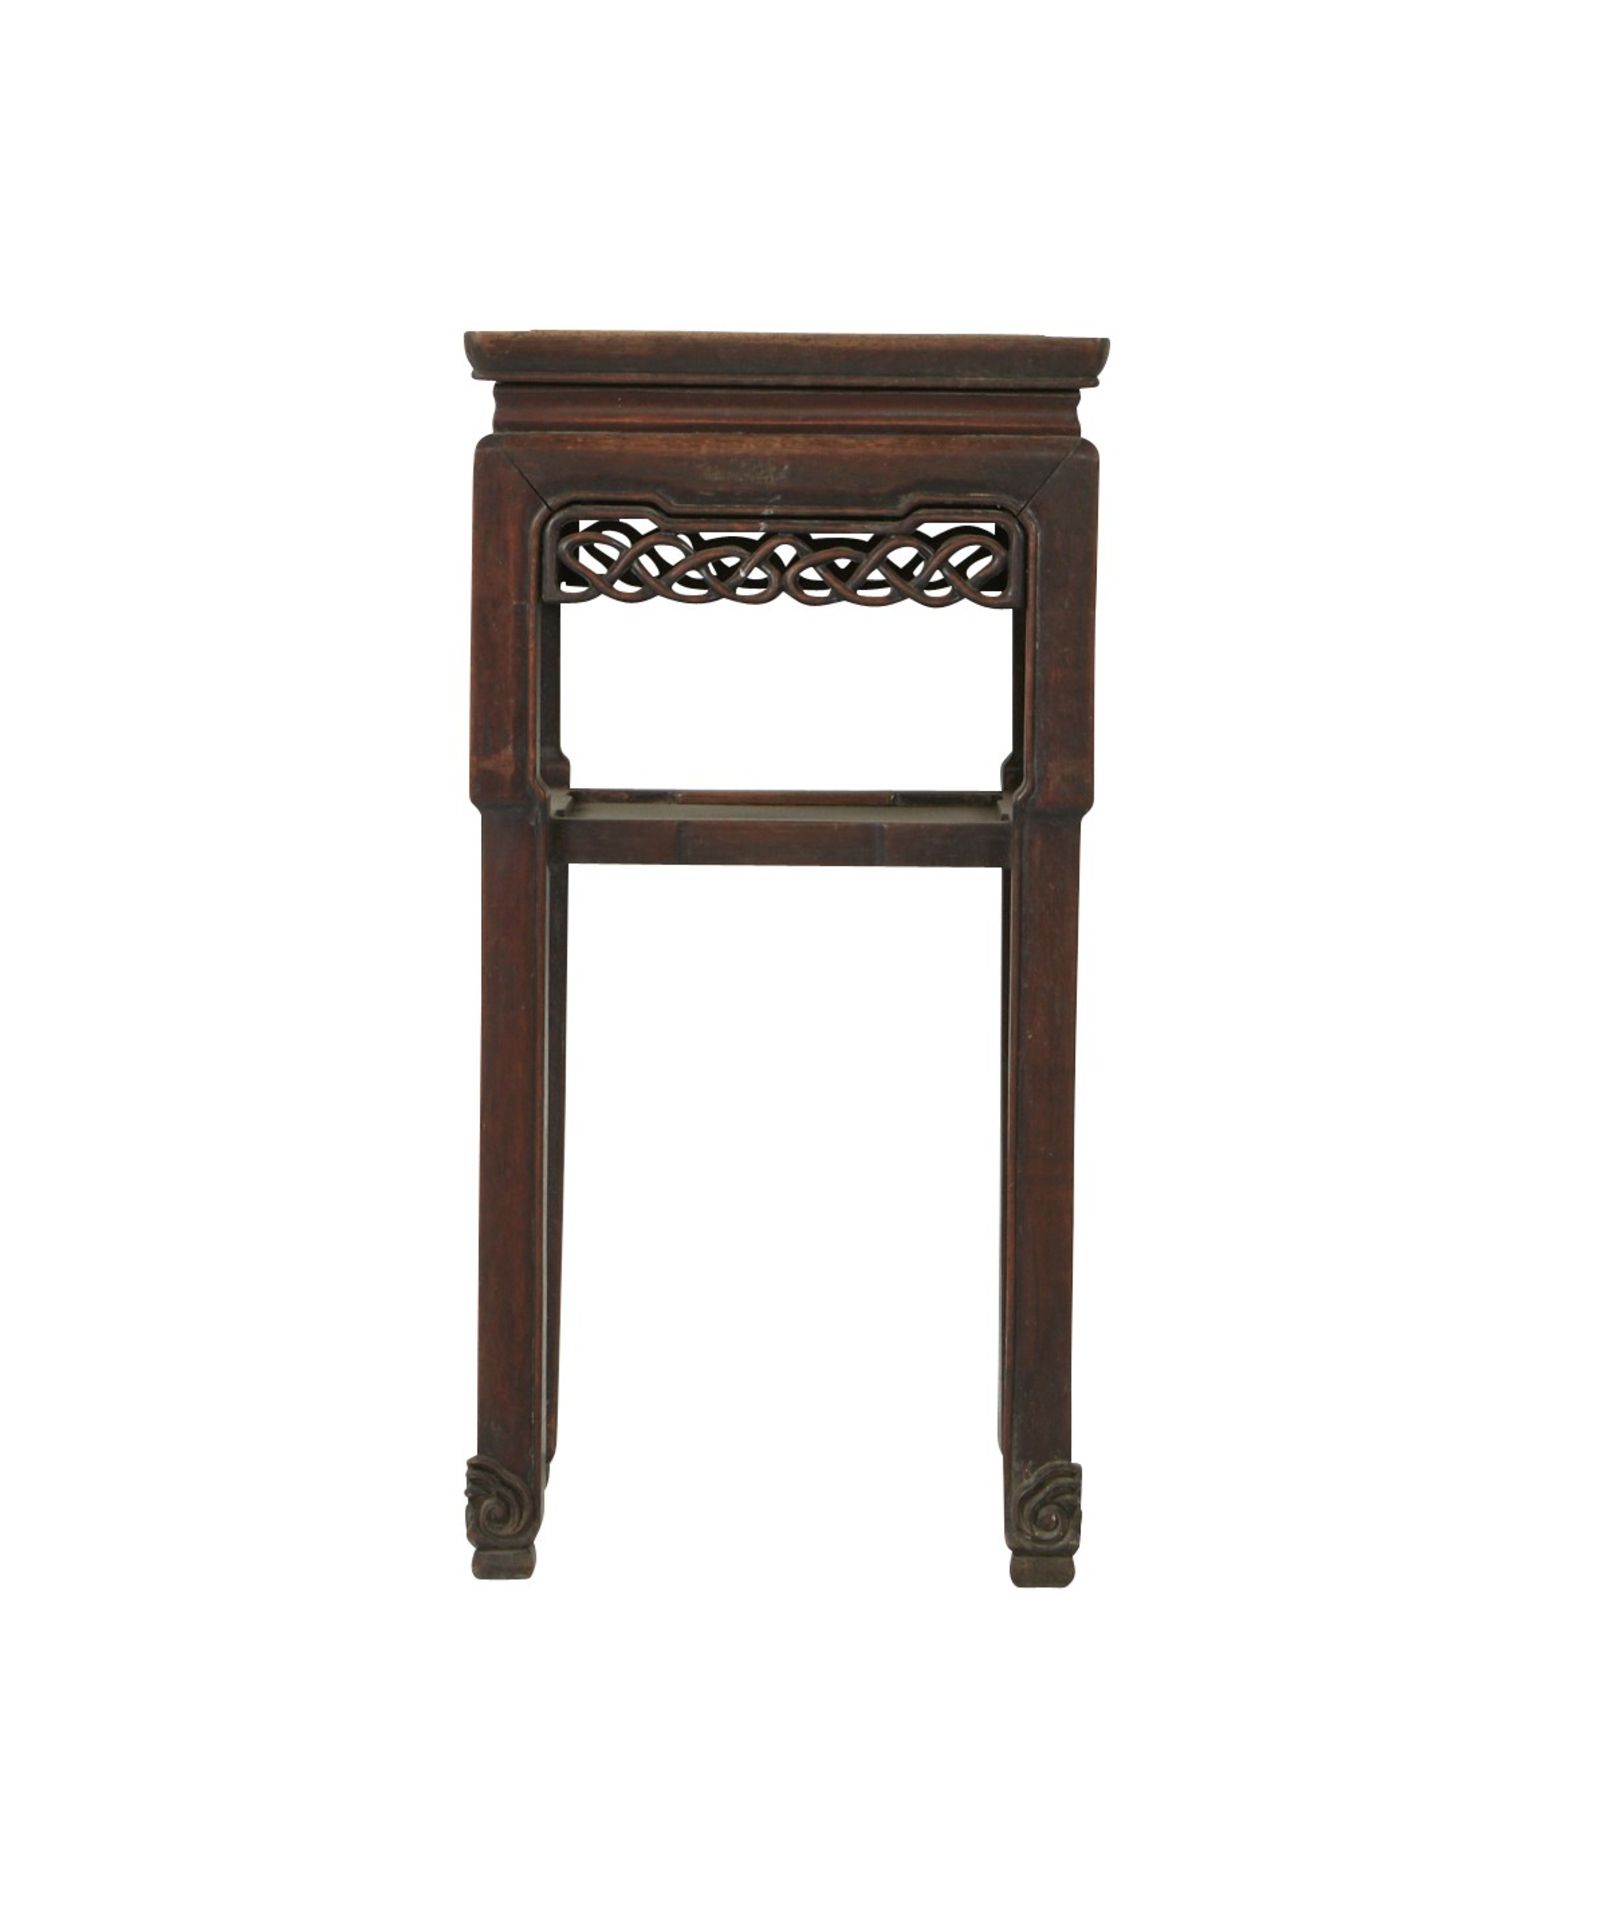 19th c. Chinese Rosewood Stand w/ Carved Skirt - Image 6 of 8